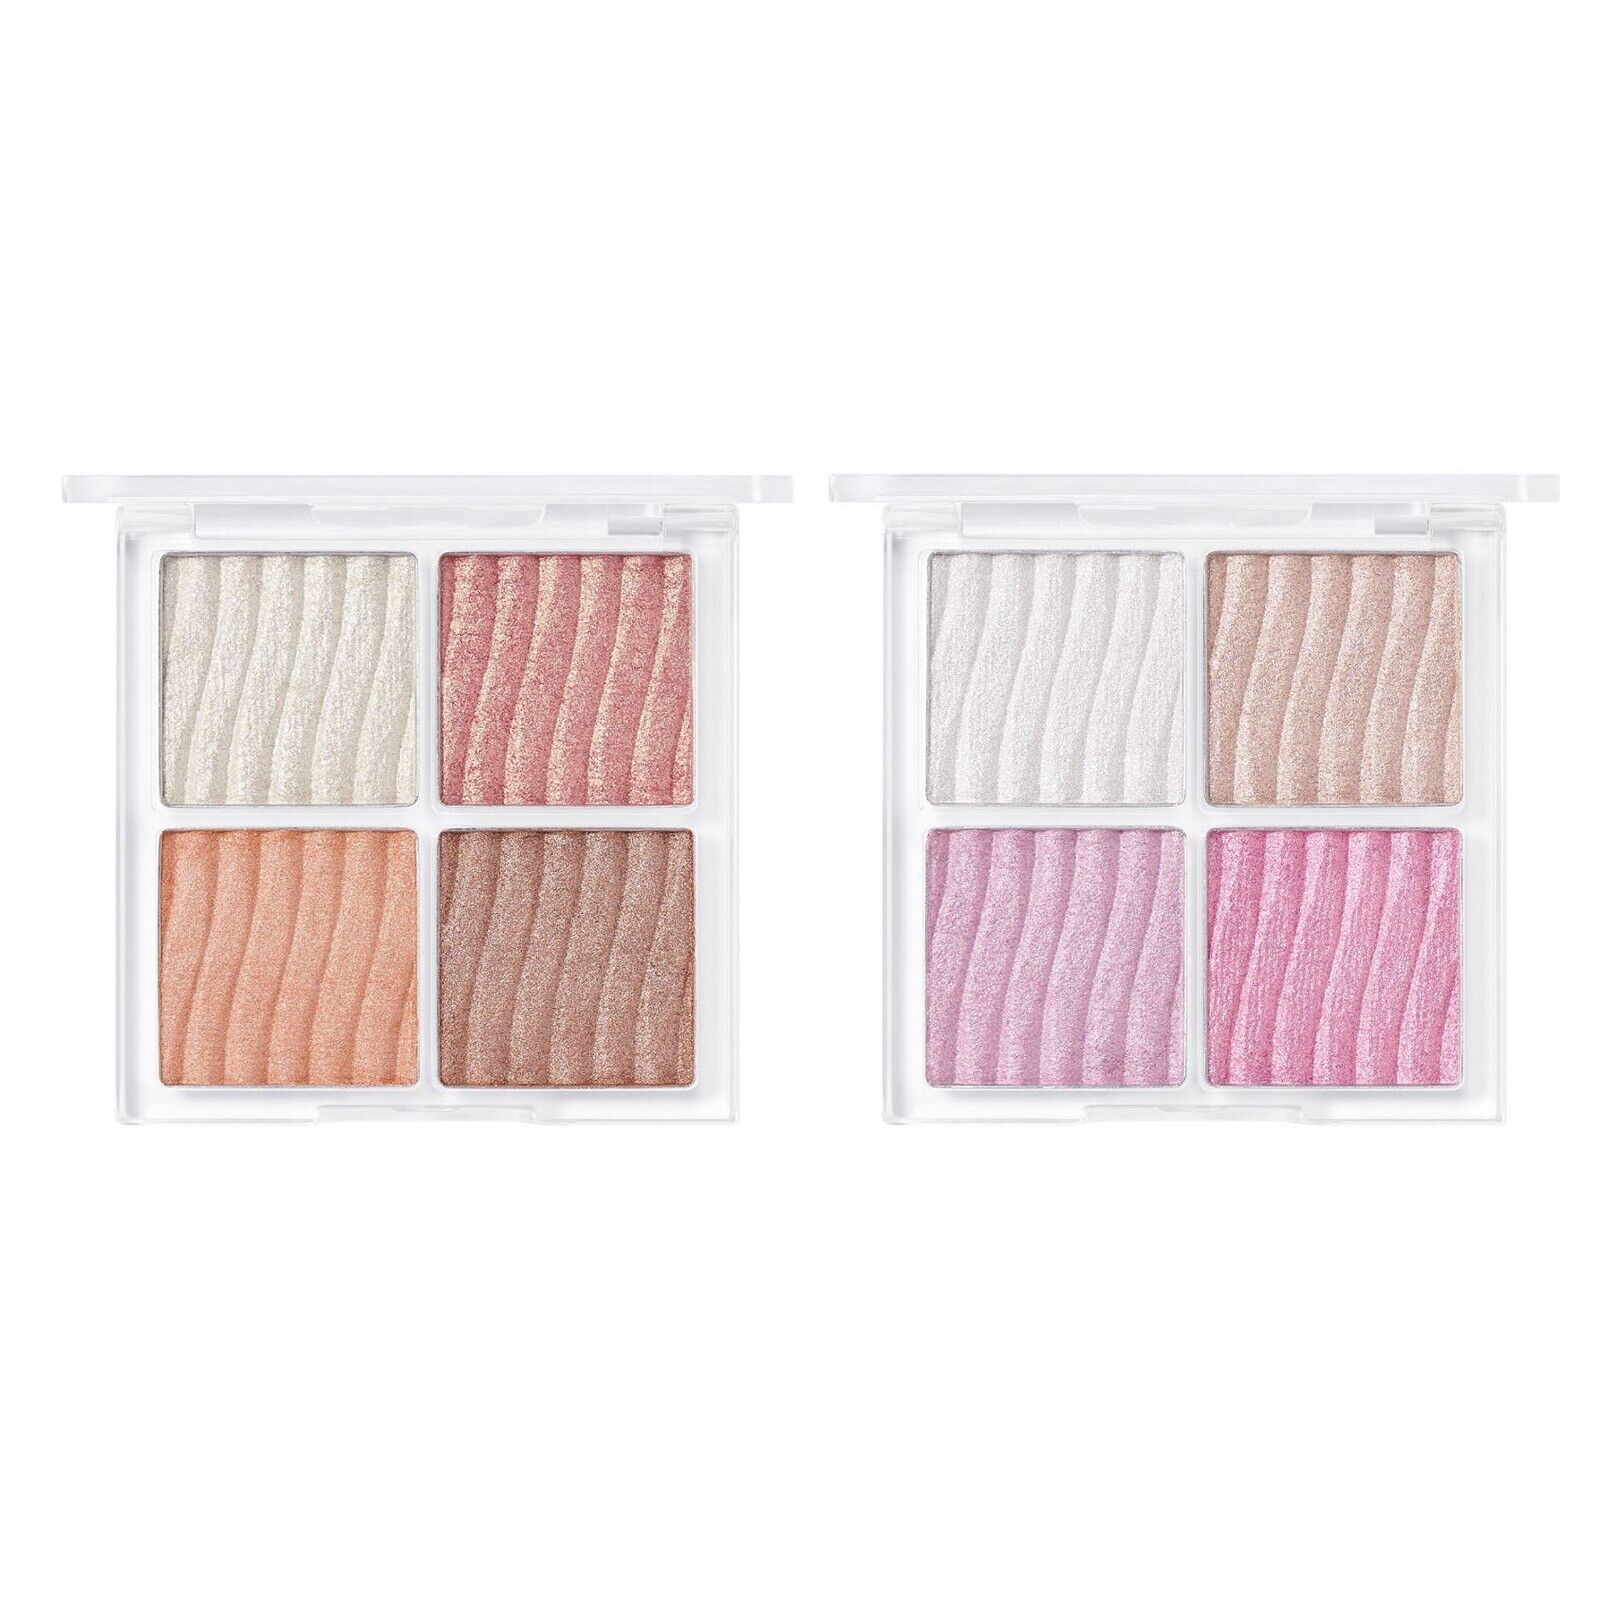 WAKEMAKE Glow Contouring Highlighter Palette 7.8g on white background.